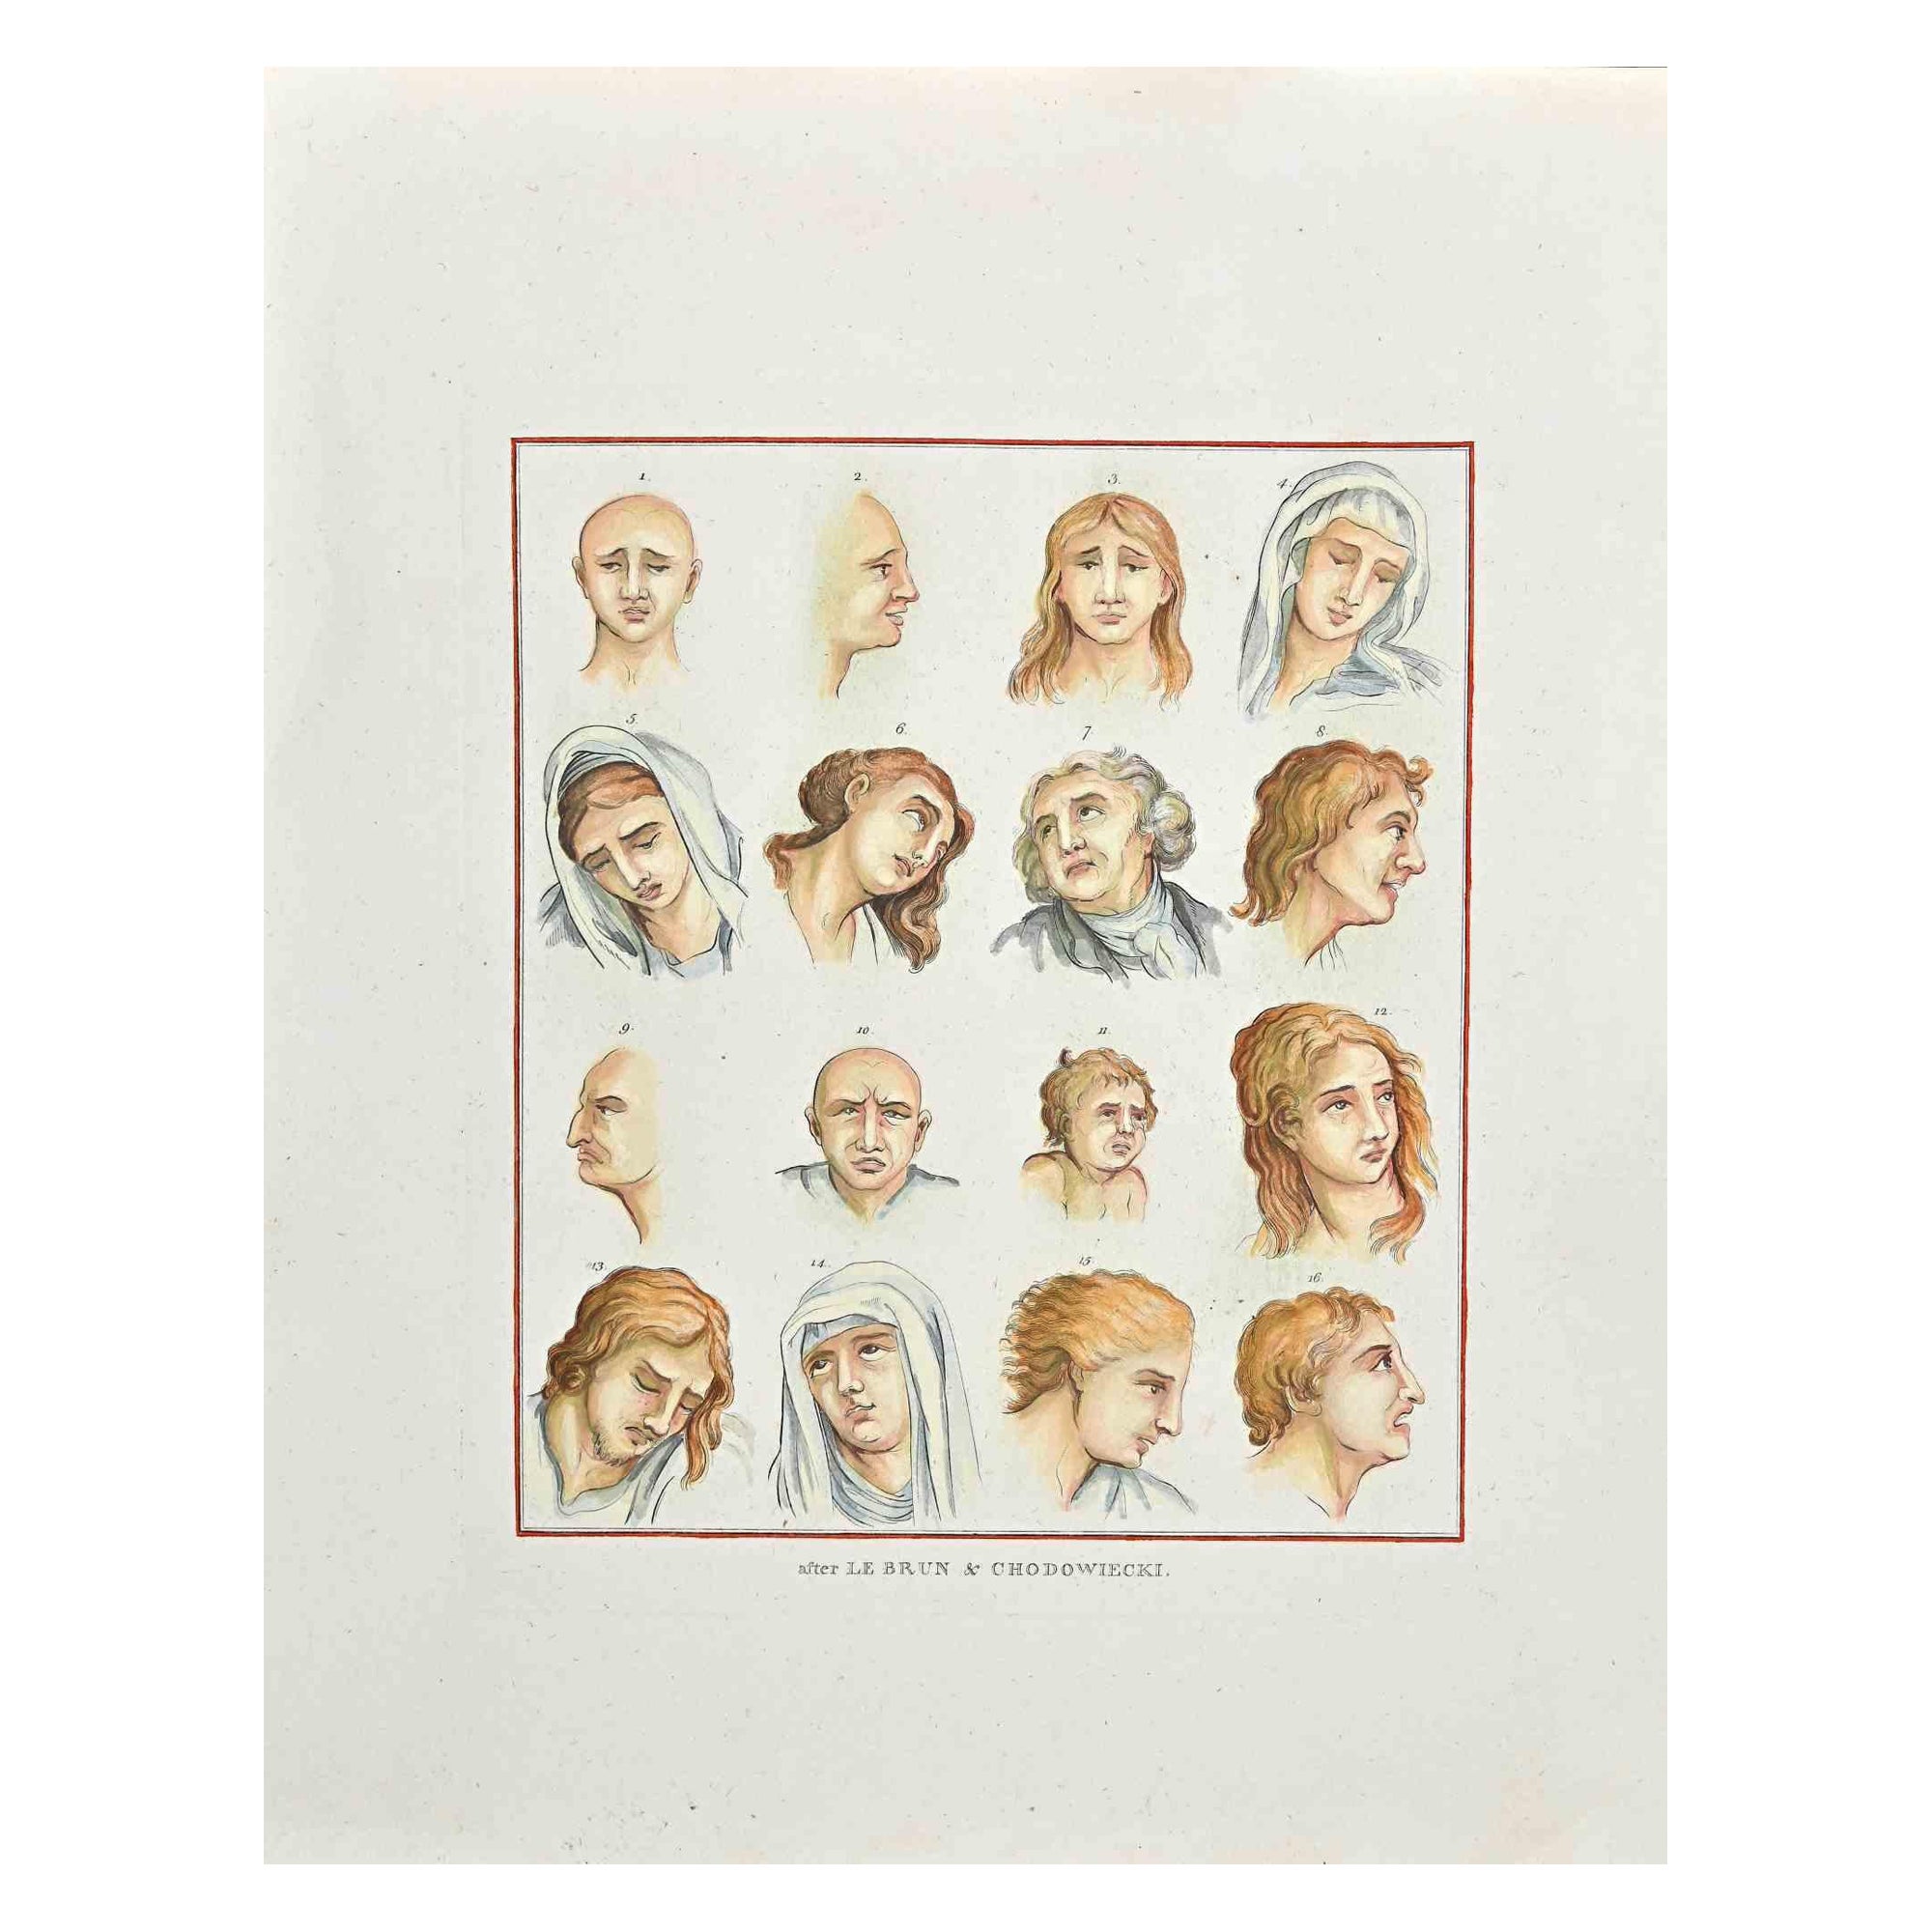 Porträts, Original-Radierung, 1810. The Physiognomy - The Noses ist eine Original-Radierung von Thomas Holloway für Johann Caspar Lavaters "Essays on Physiognomy, Designed to Promote the Knowledge and the Love of Mankind", London, Bensley, 1810.